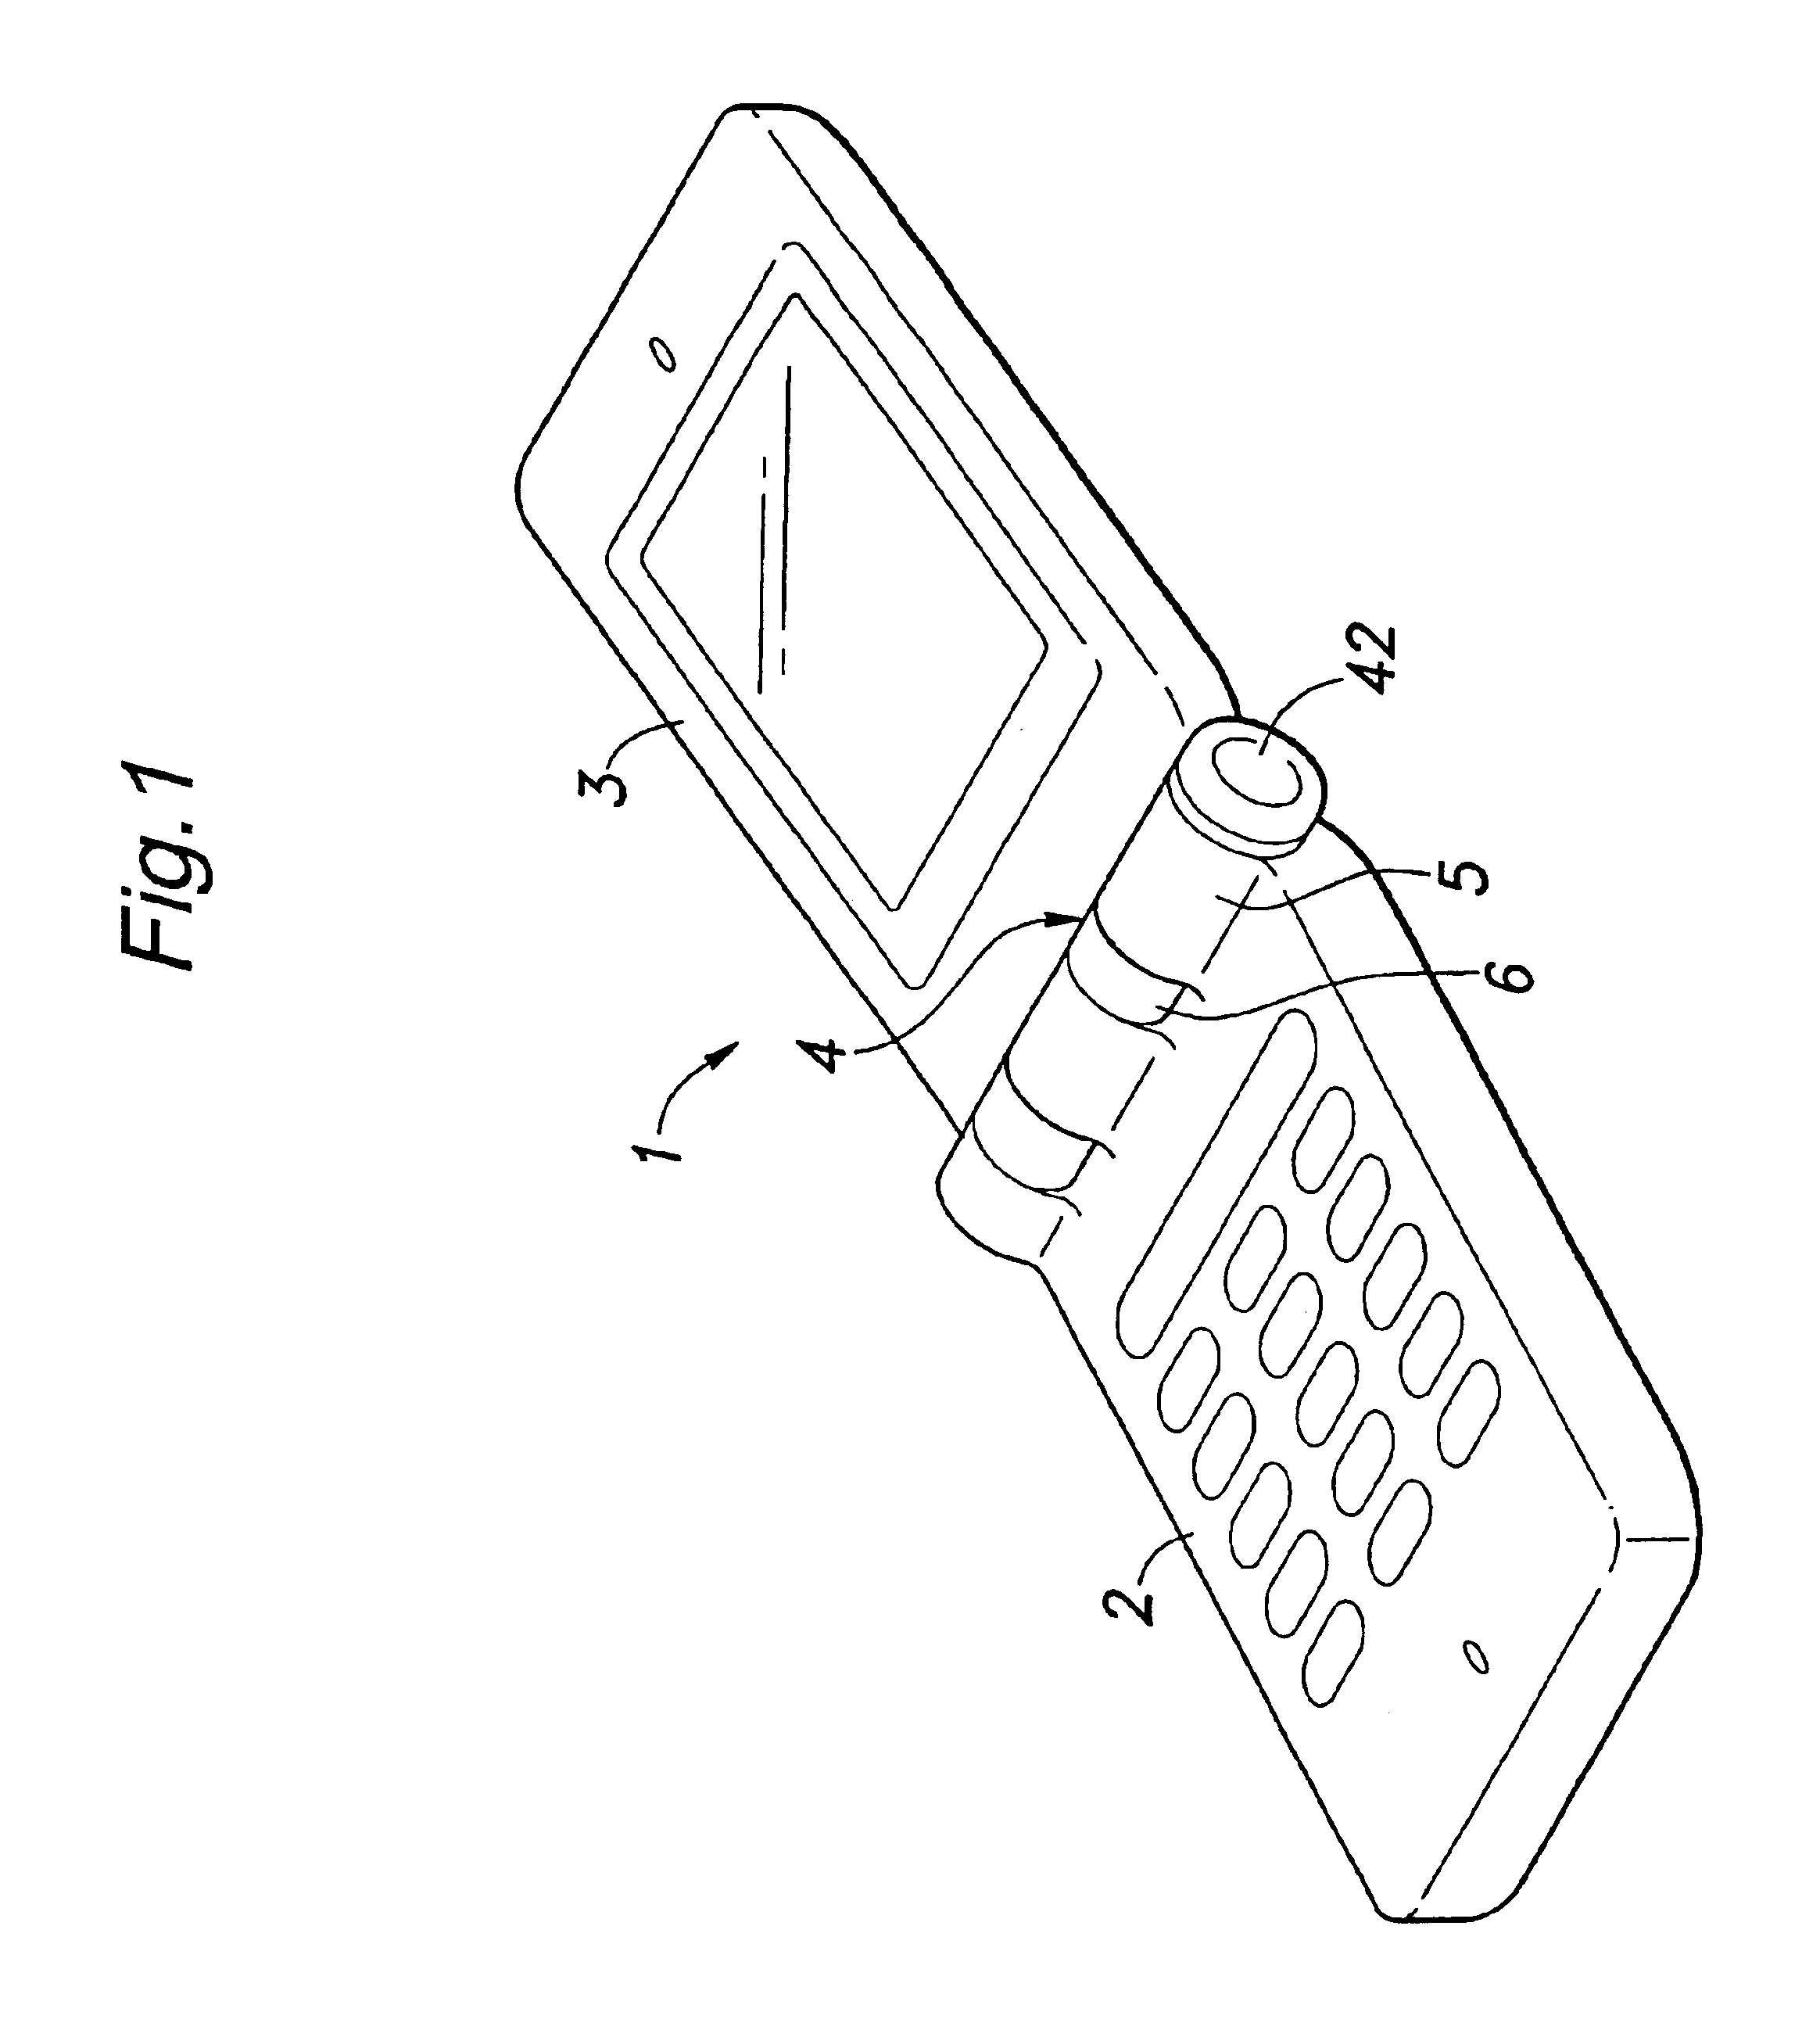 Hinge structure incorporated with a rotary actuator